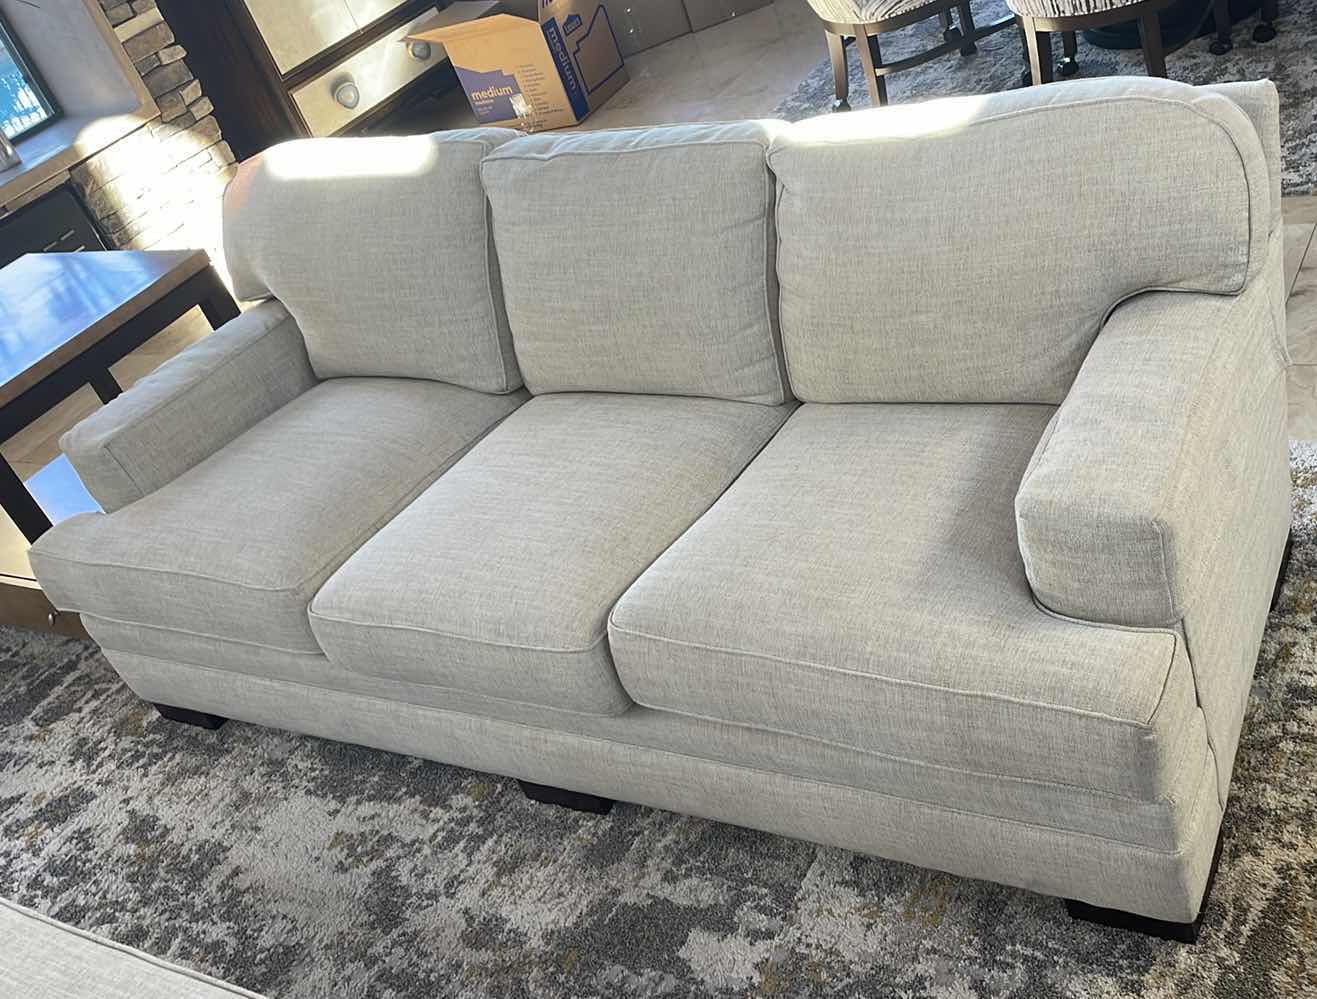 Photo 3 of TAYLOR MADE SOFA BY TAYLOR KING ATTACHED BACK CUSHIONS LAMSON LINEN FINISH FABRIC 87” X 40”